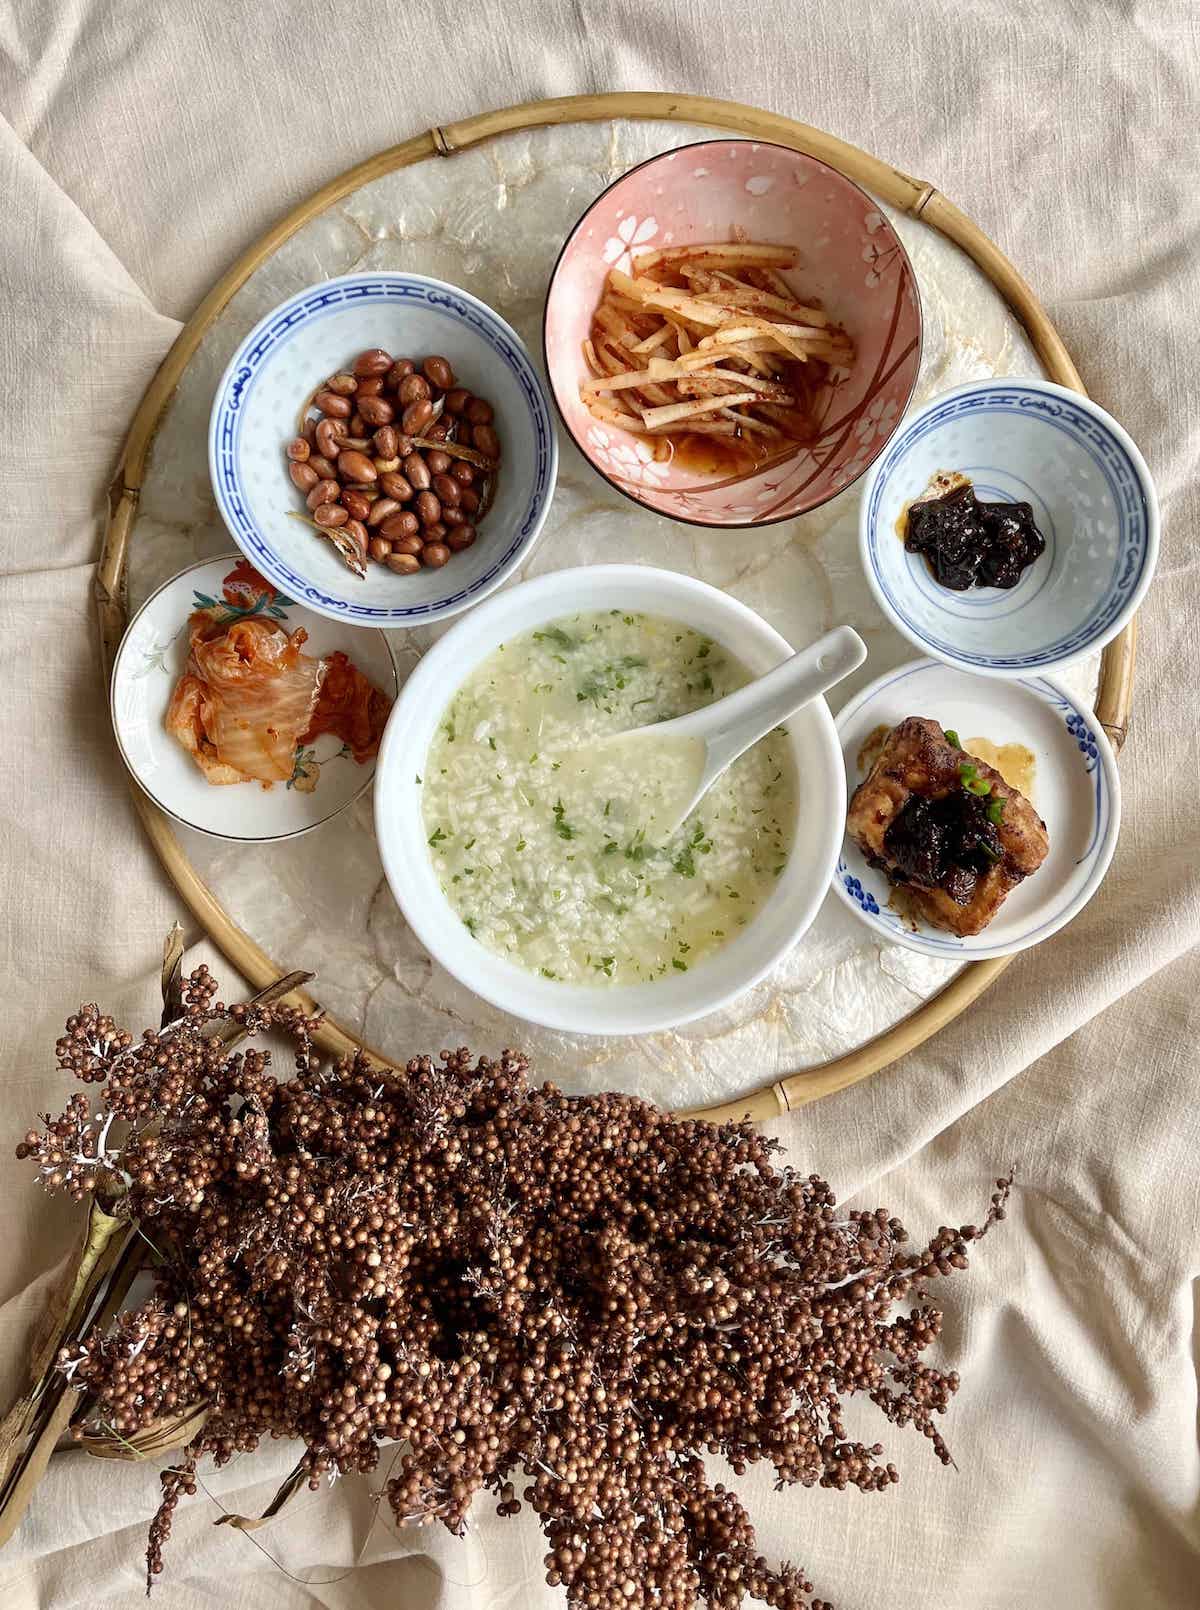 A bowl of chicken rice porridge with various vegetable side dishes.